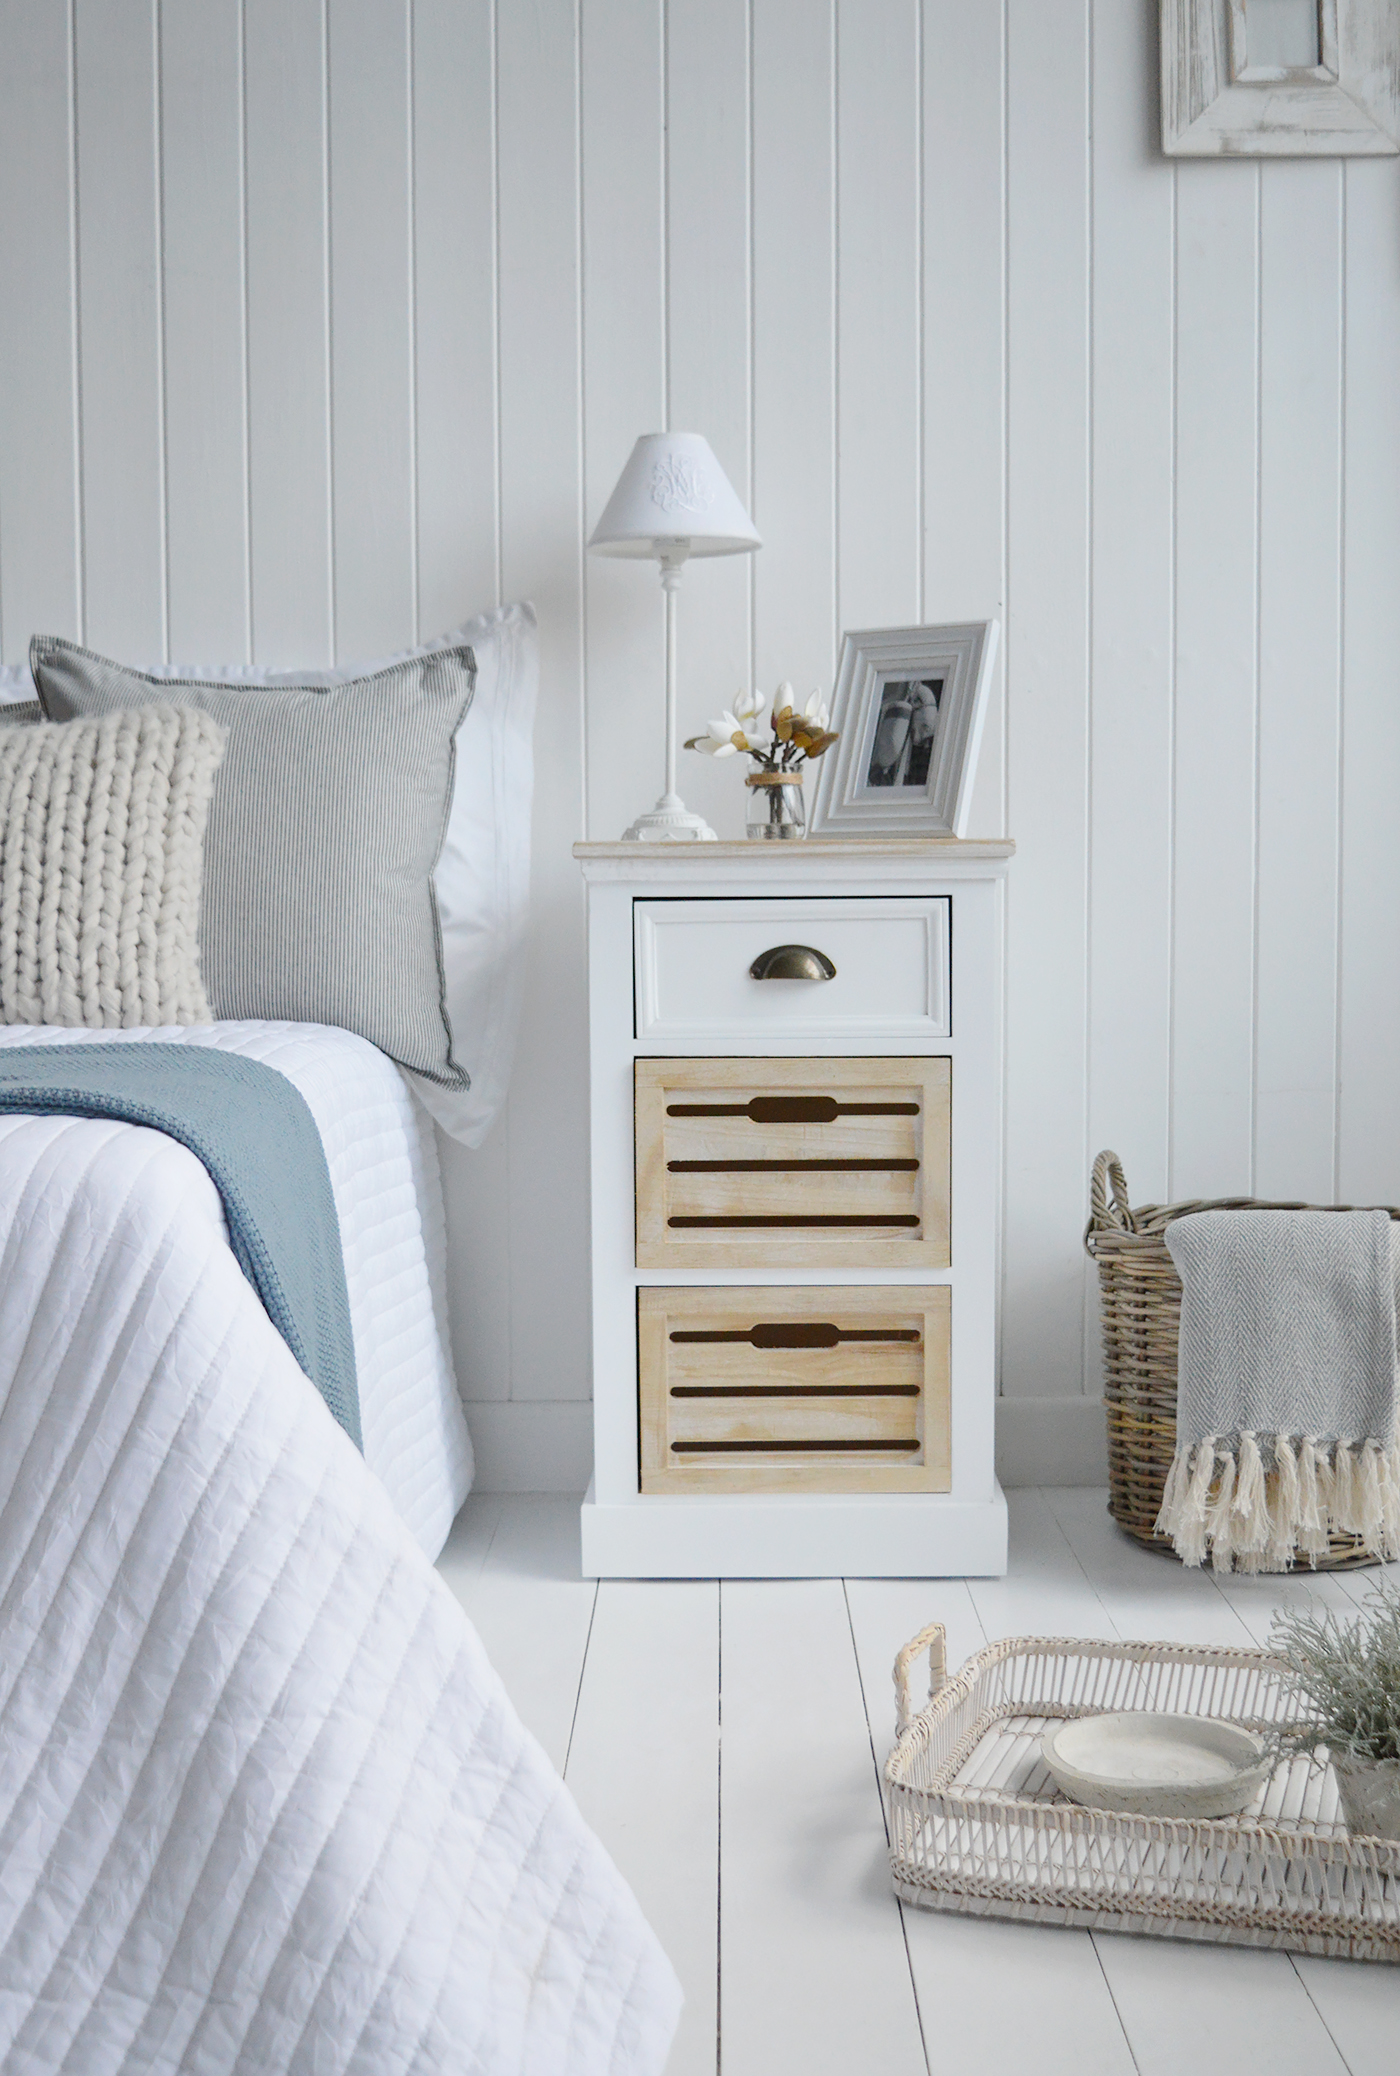 a white bedroom cabinet with 3 drawers in a  white Hamptons style bedroom interior 